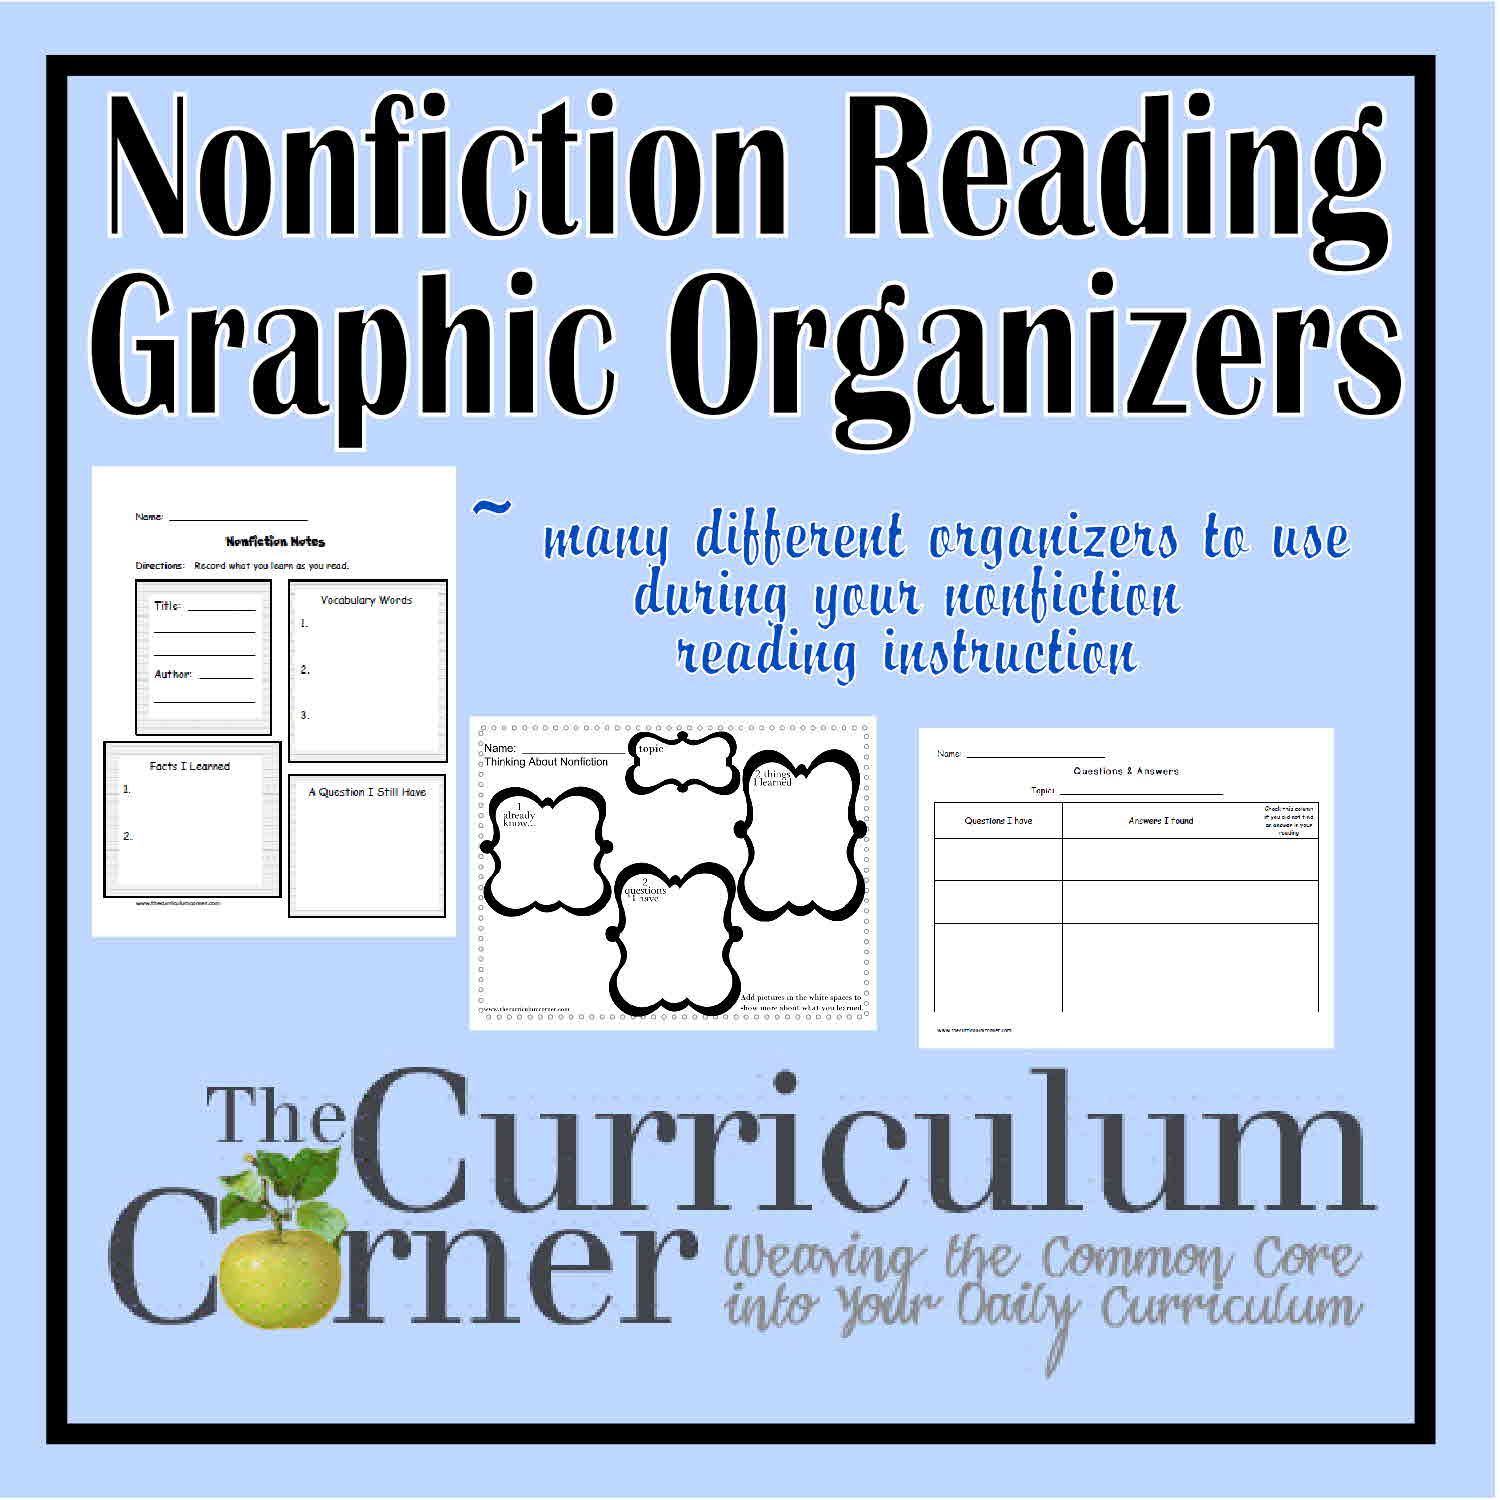 nonfiction-graphic-organizers-for-reading-the-curriculum-corner-123